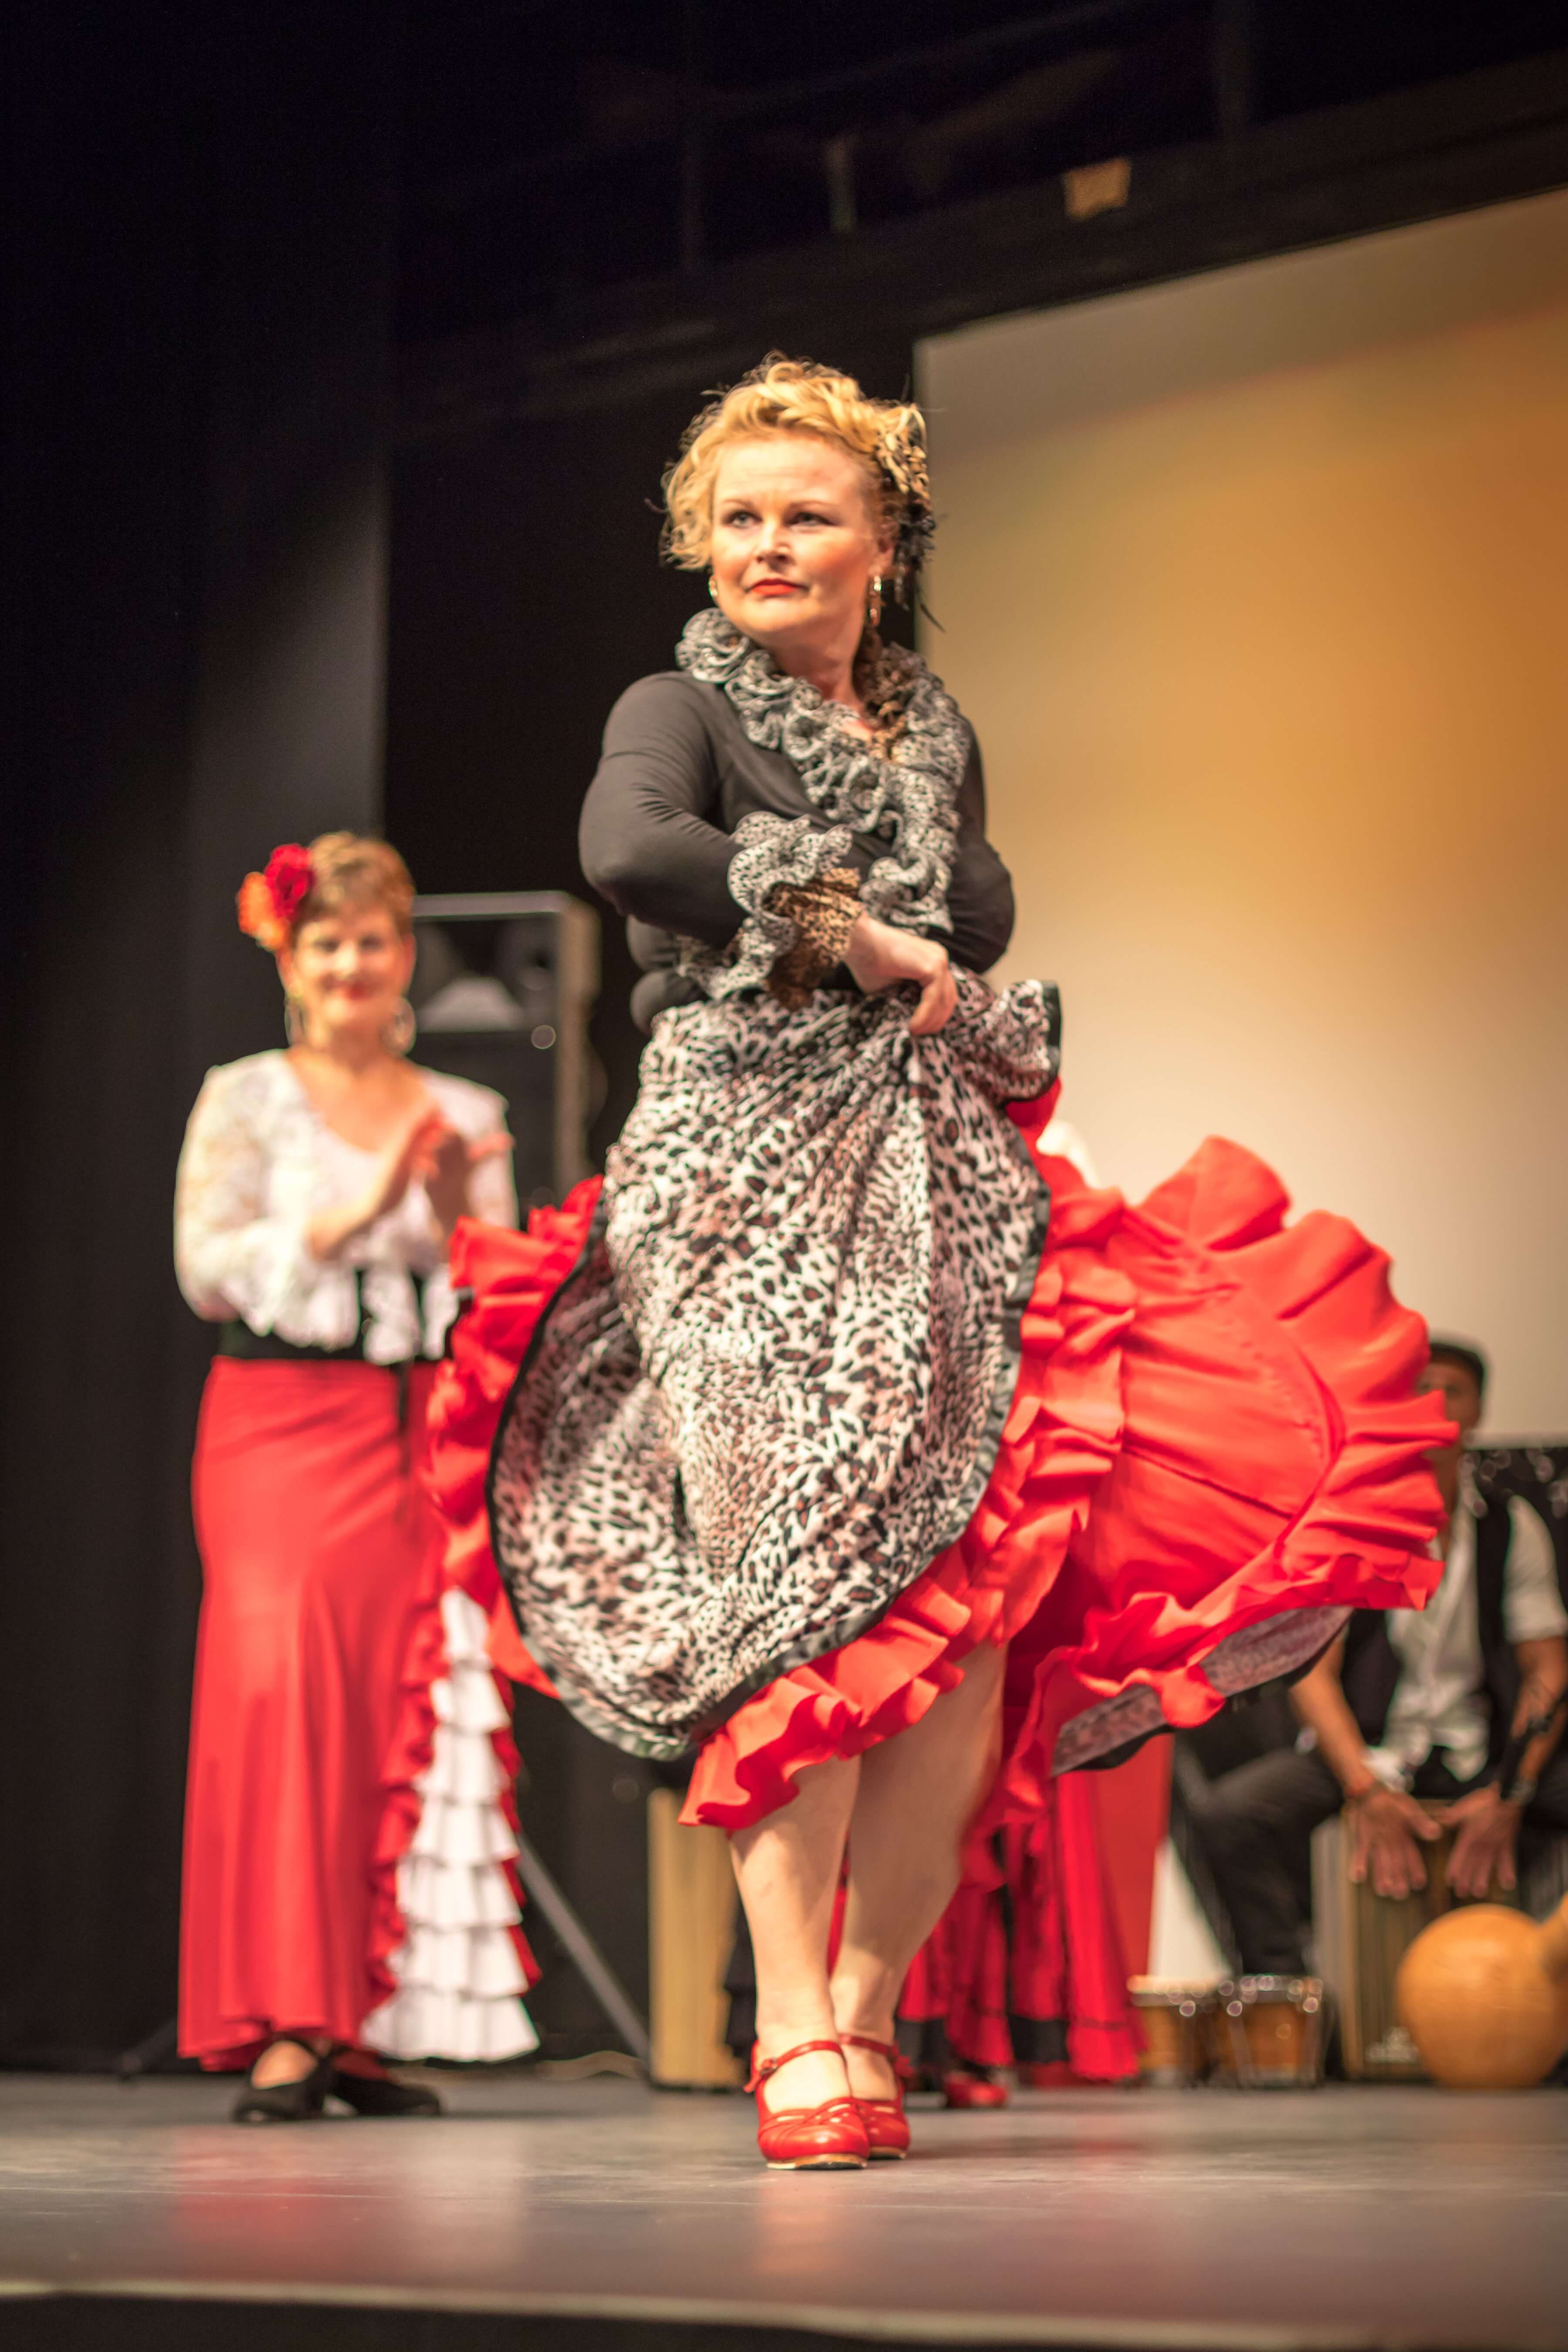 Reconnecting with Flamenco for a positive outcome